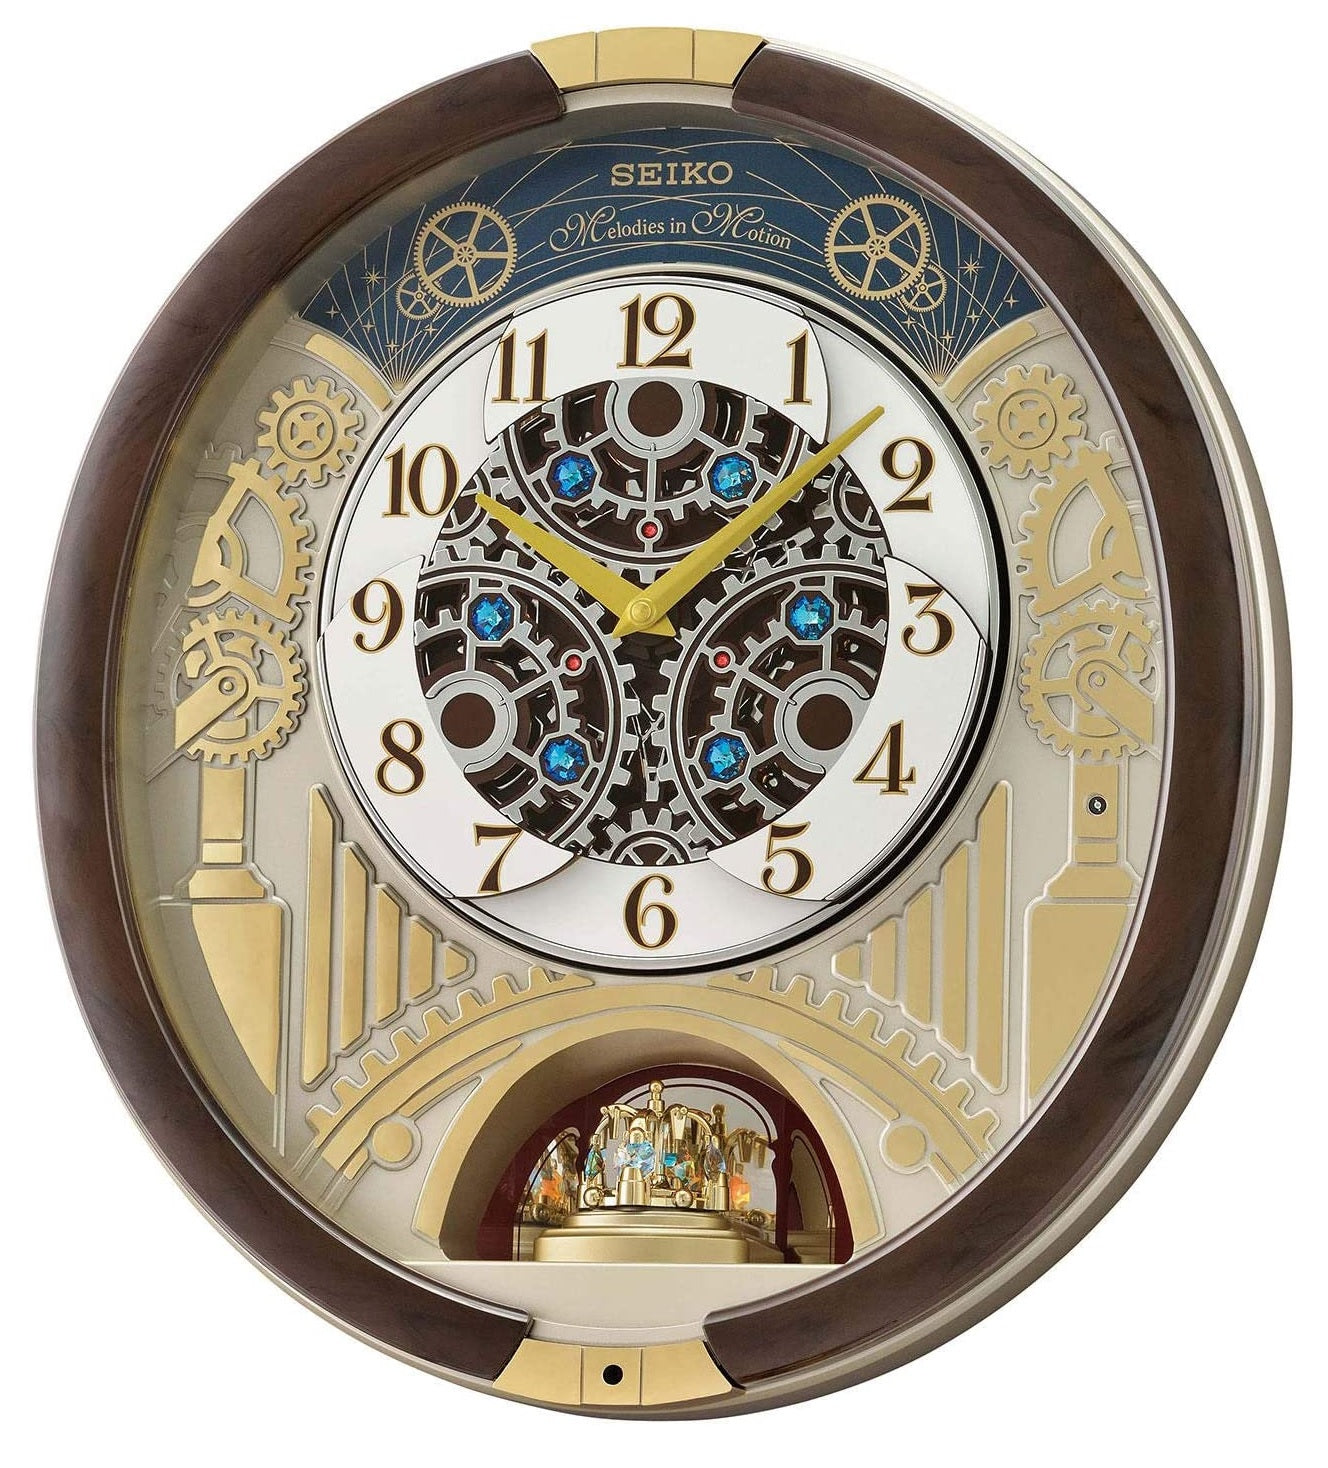 Seiko Special Collection Edition Melodies in Motion Clock with Swarovski Crystals